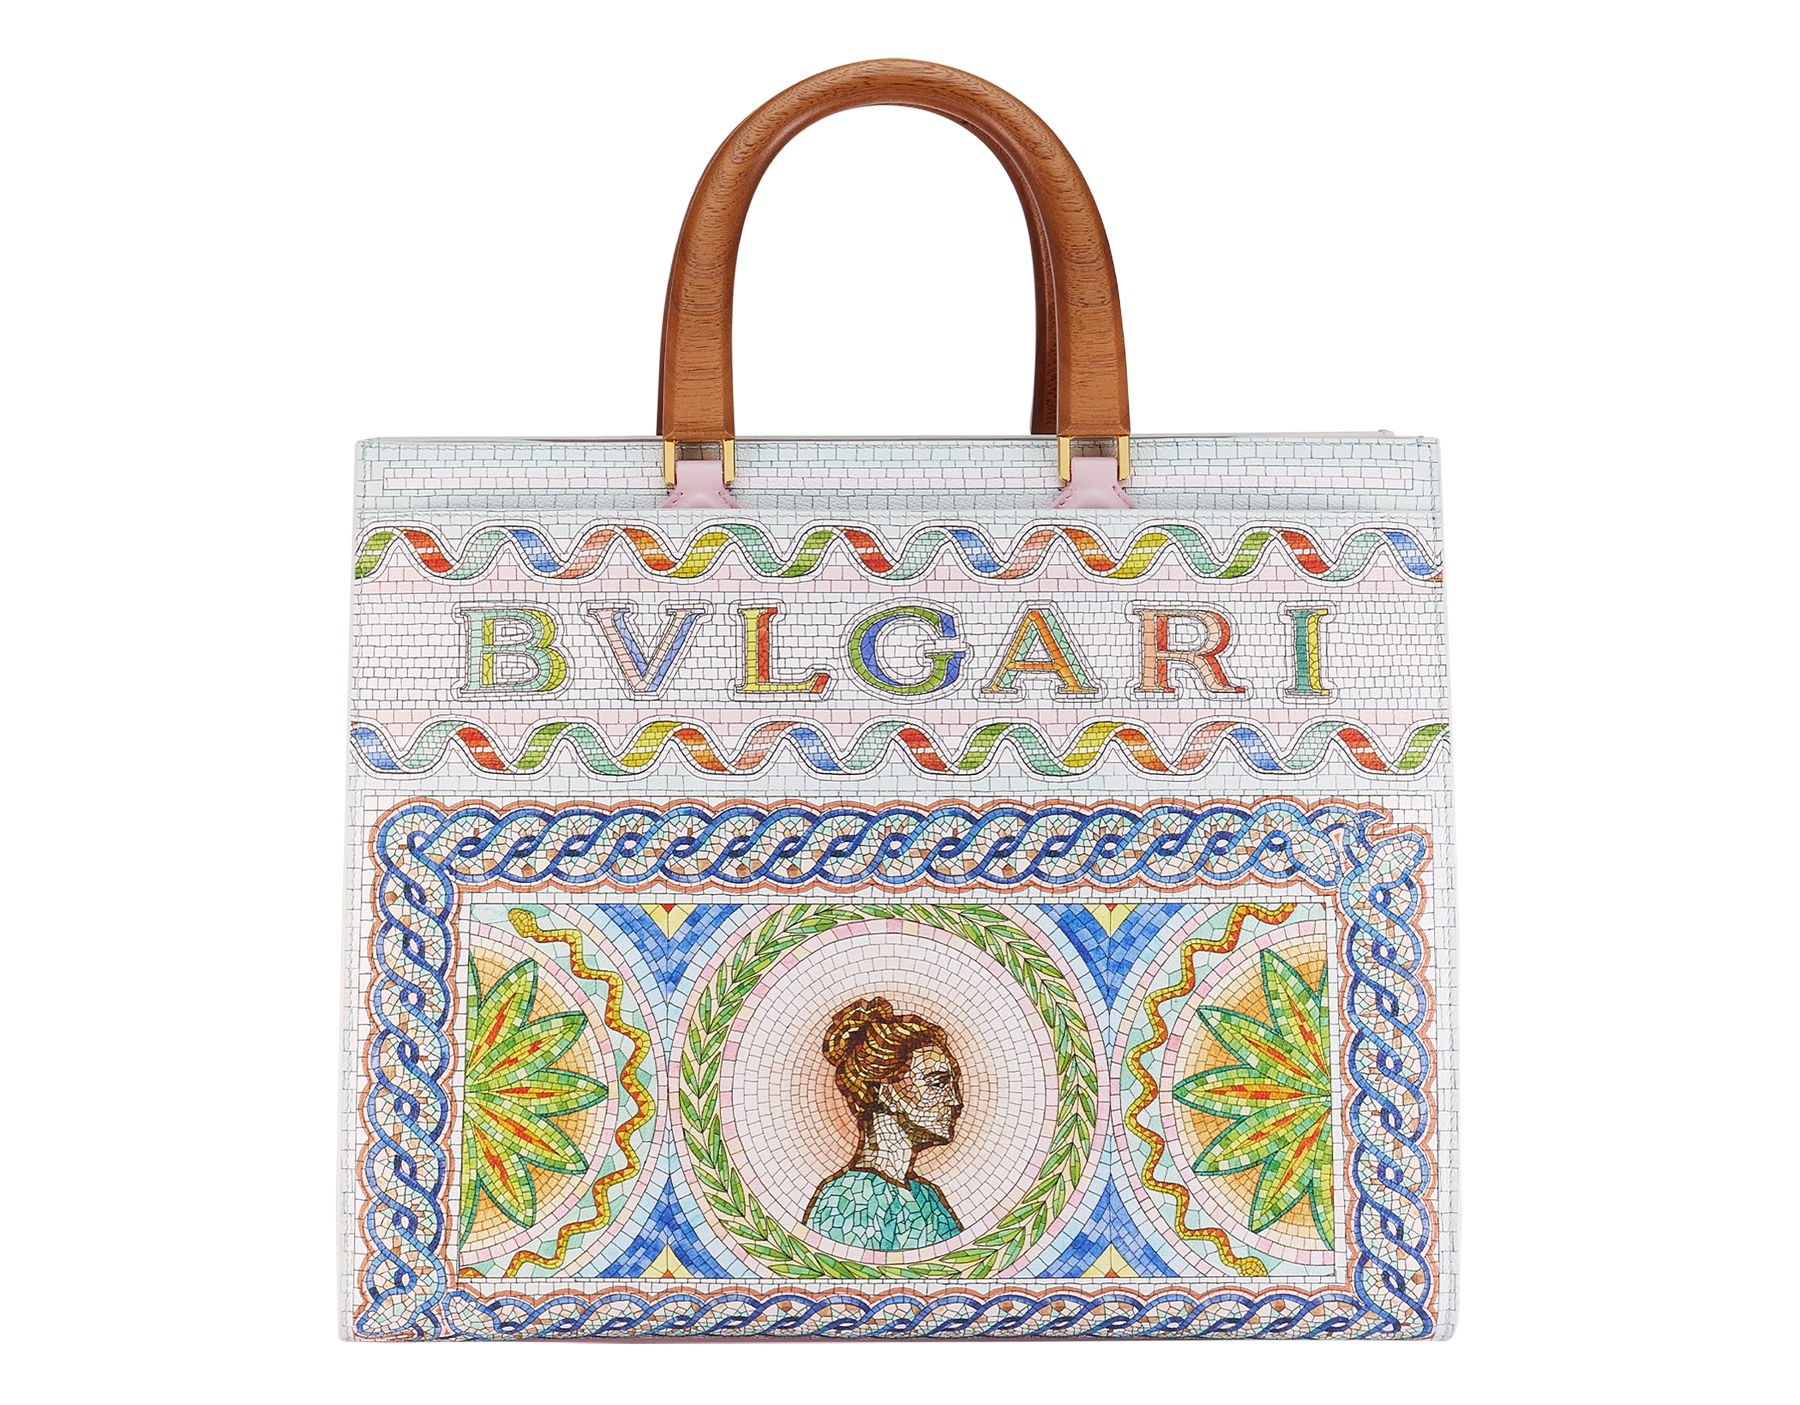 Casablanca x Bulgari large tote bag in soft grain printed calf leather featuring a Roman mosaic pattern, with dusty pink calf leather sides and dusty pink grosgrain lining. Iconic multicolour Bulgari decorative logo, gold-plated brass hardware and magnetic closure. 292416 image 1